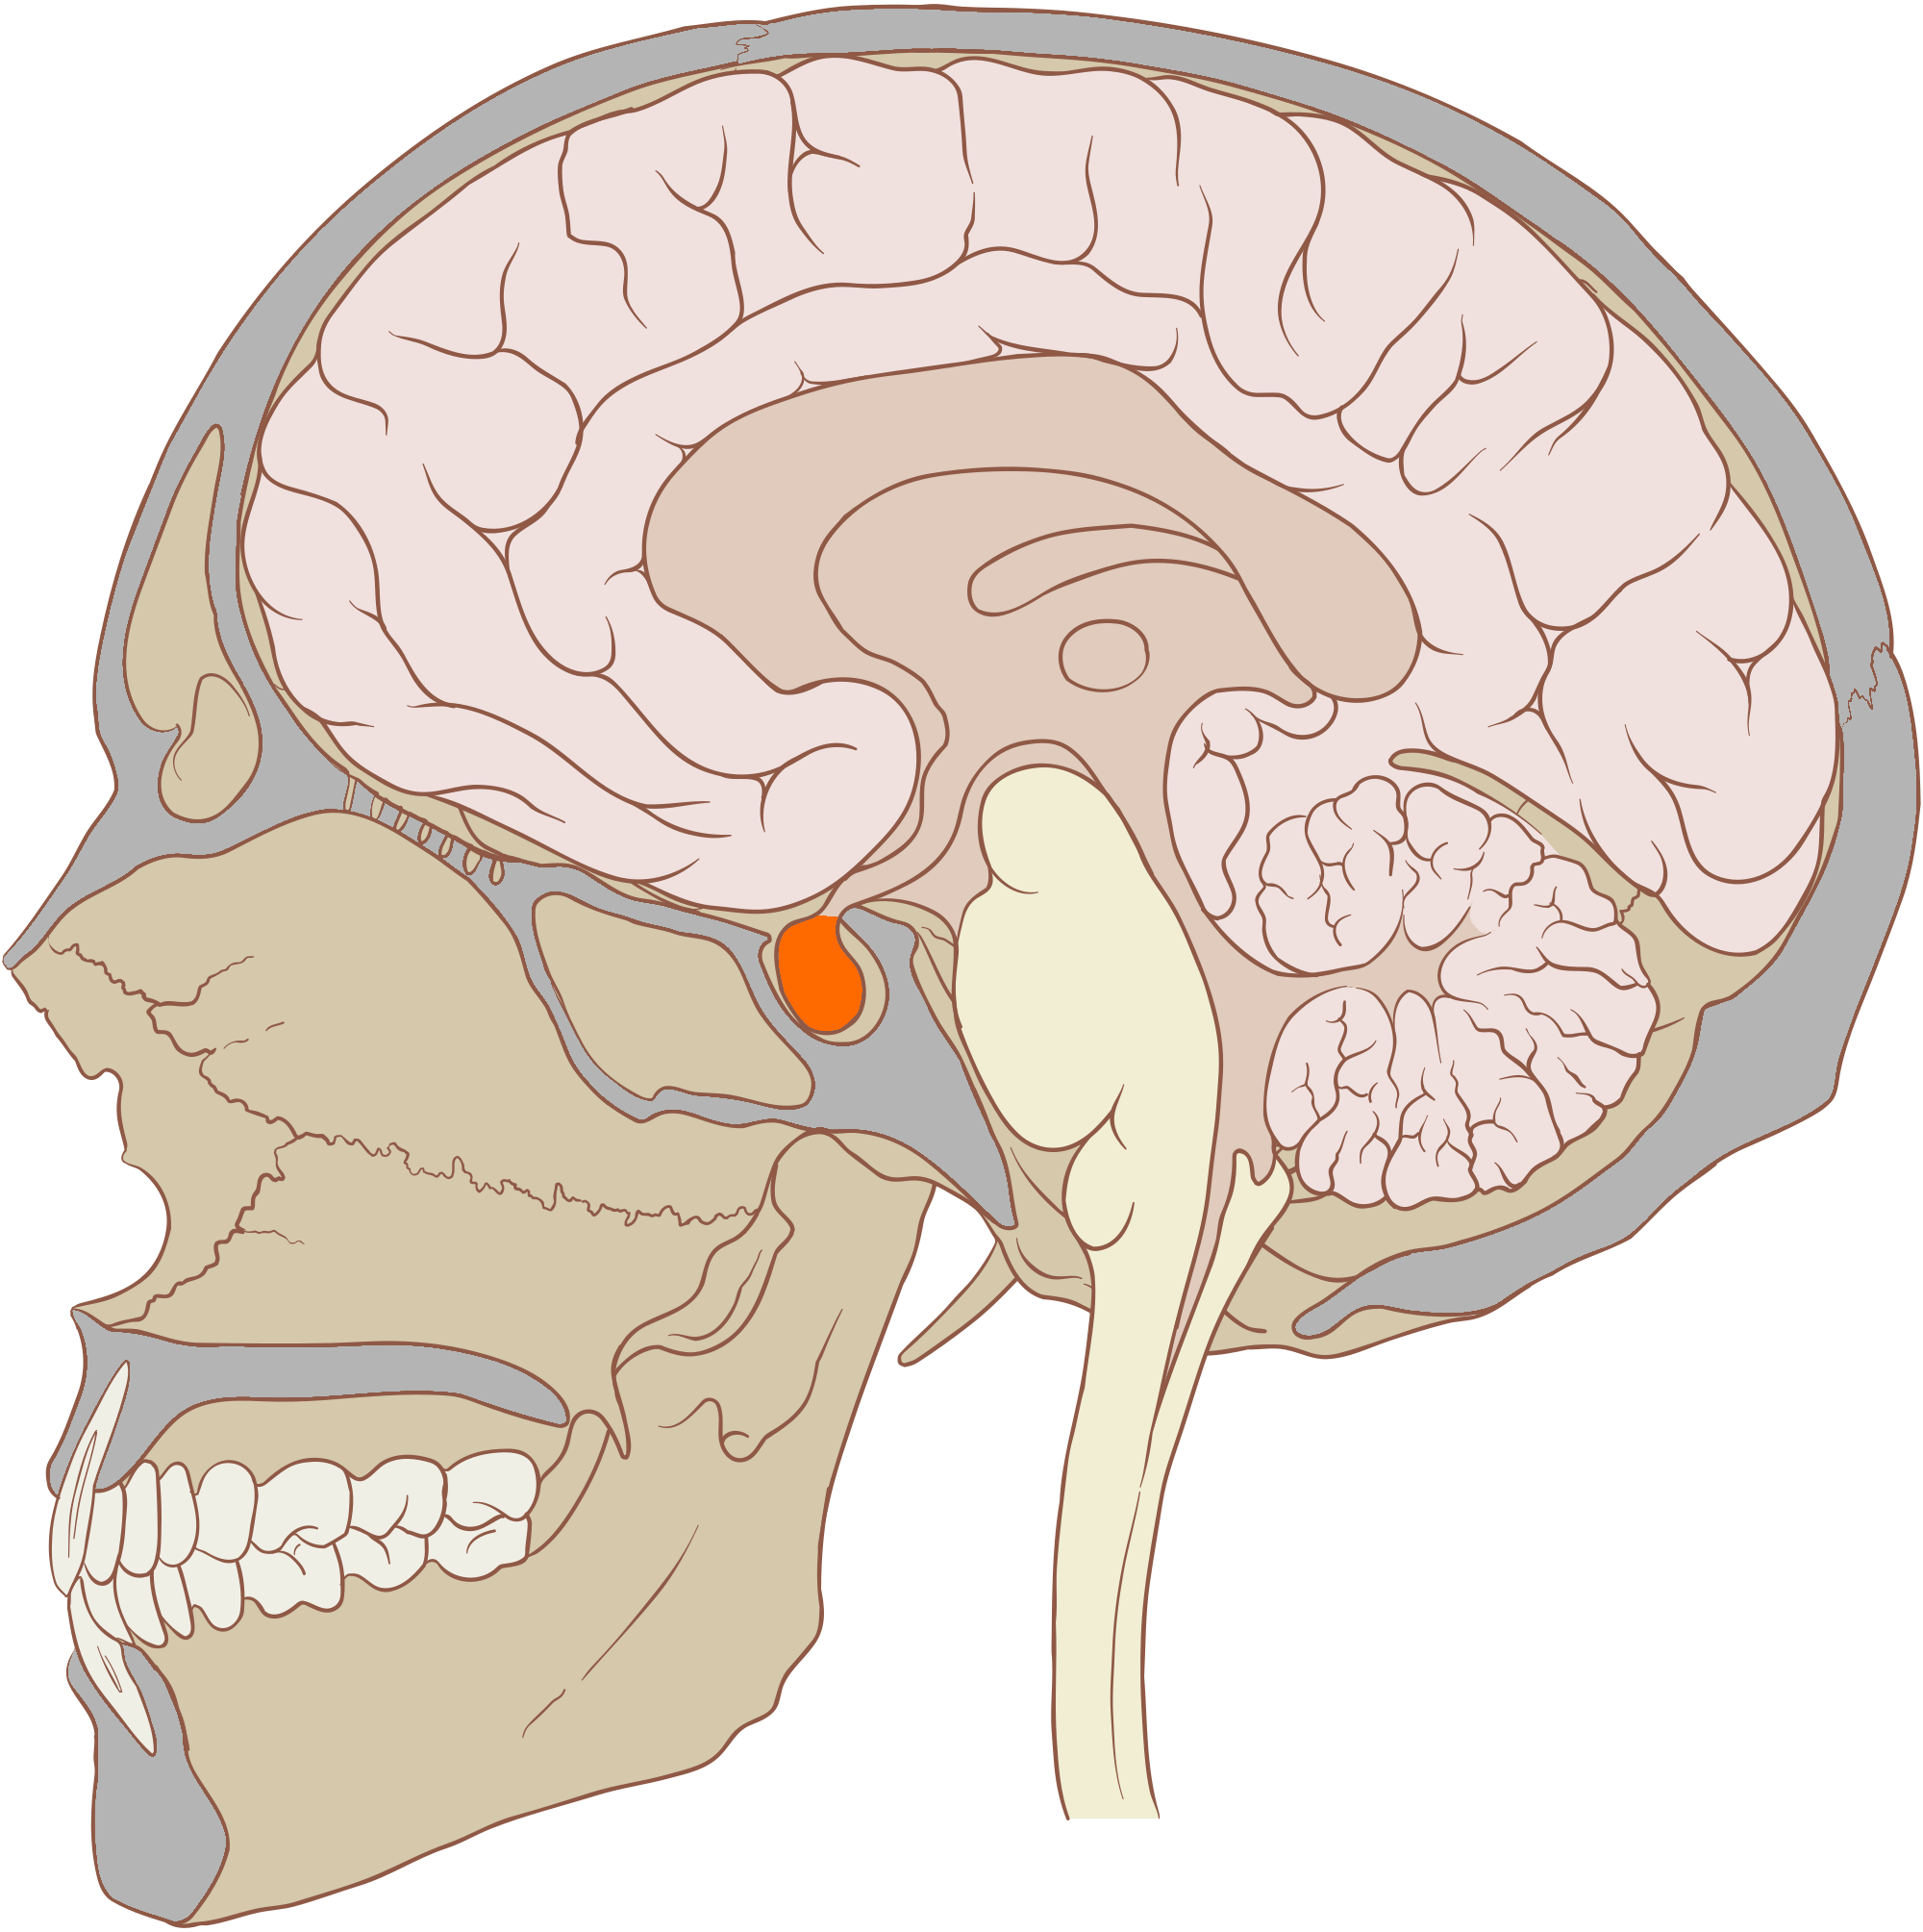 Physical location of the pituitary gland, close to the hypothalamus